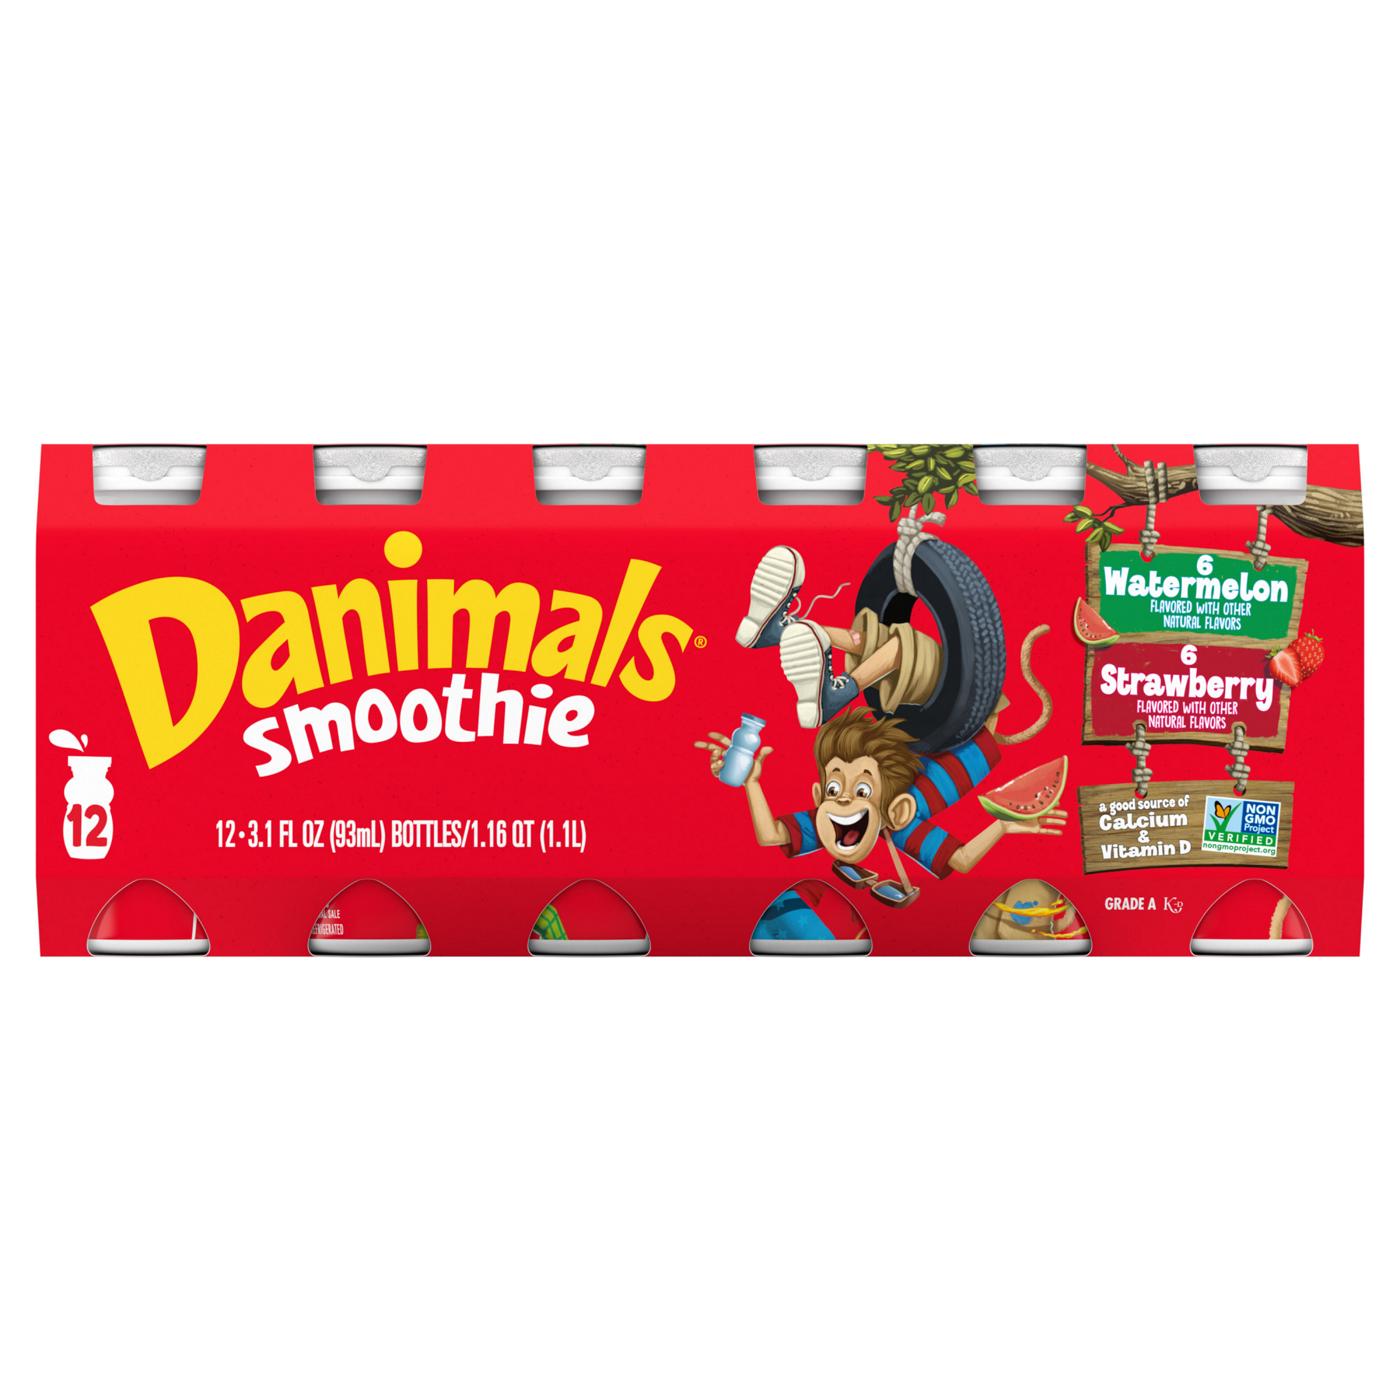 Danimals Smoothies 12 pk Bottles Variety Pack - Strawberry & Watermelon ; image 1 of 6